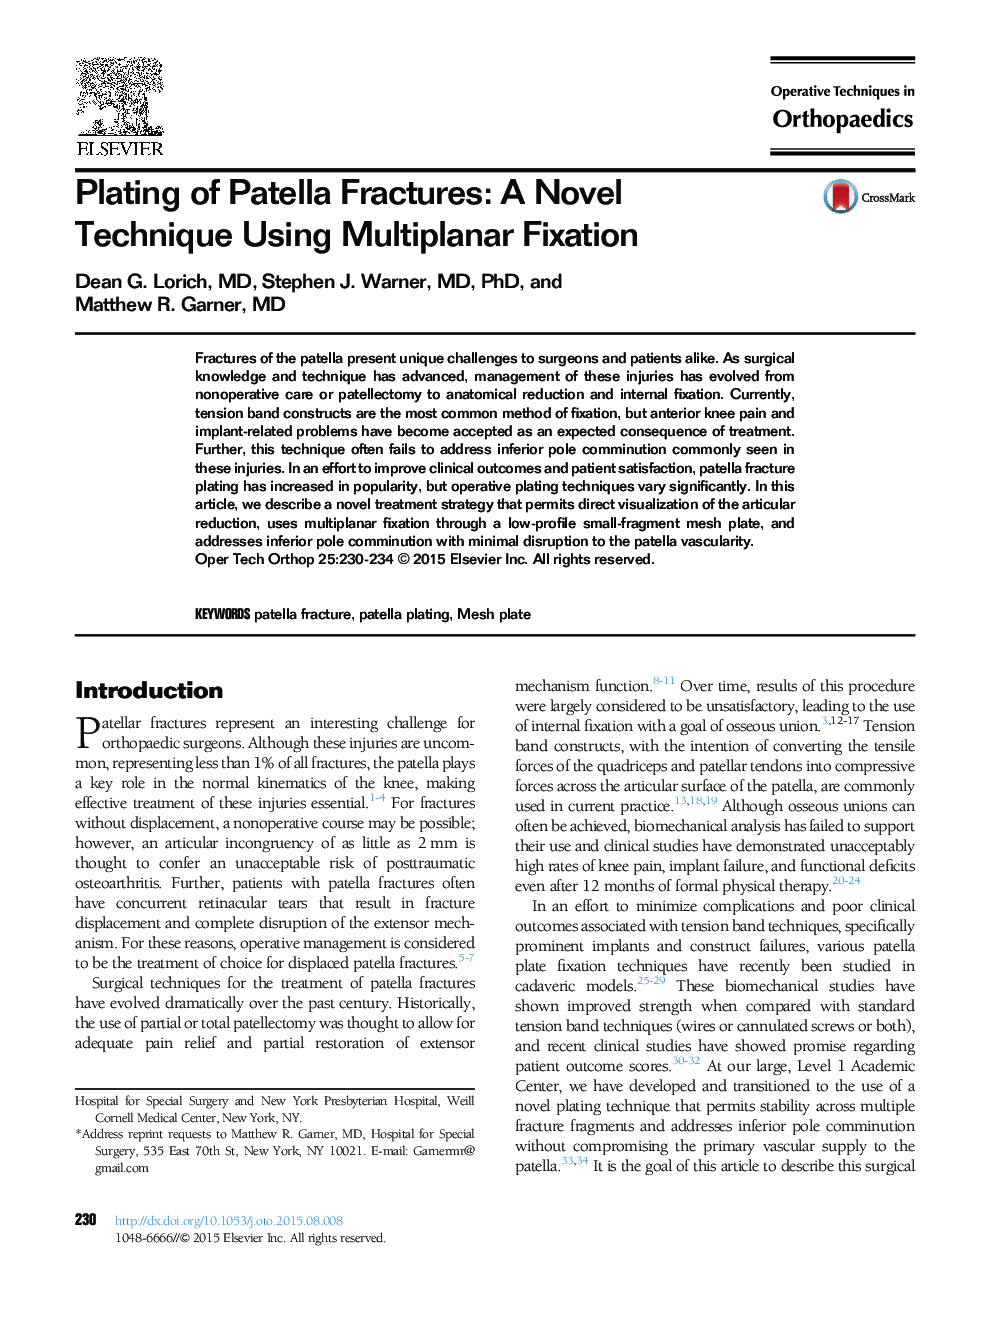 Plating of Patella Fractures: A Novel Technique Using Multiplanar Fixation